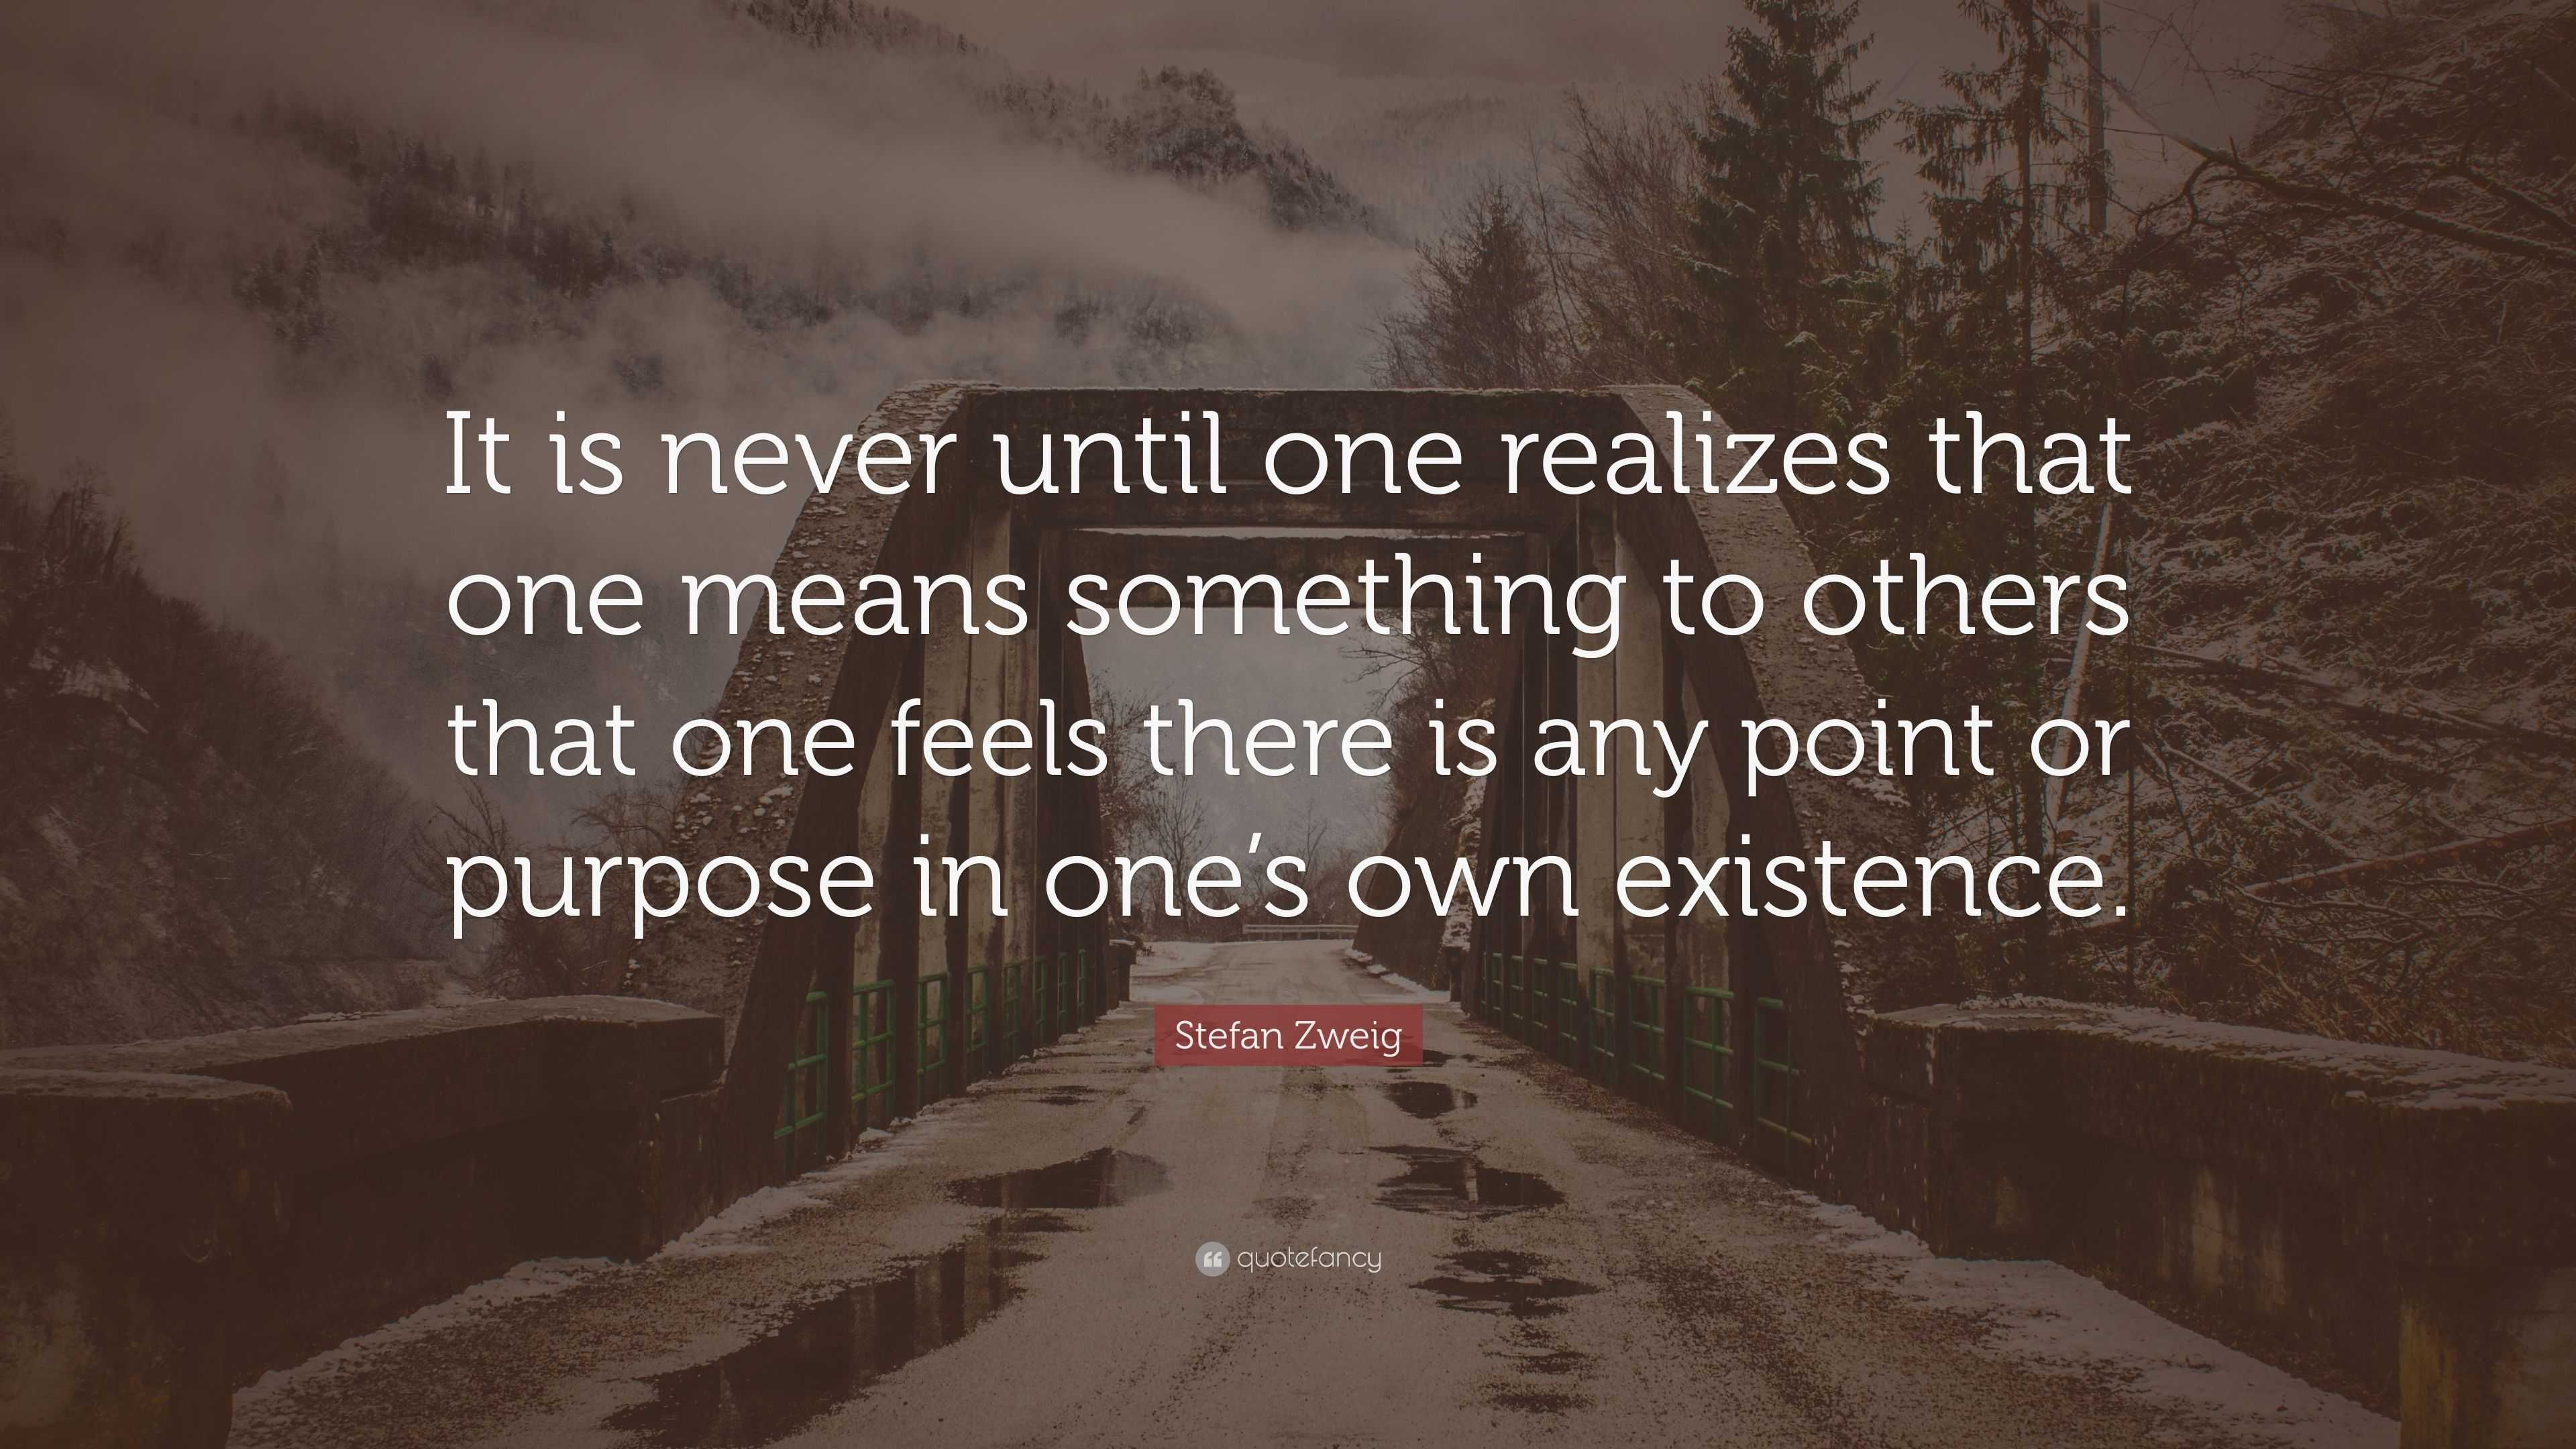 Stefan Zweig Quote: “It is never until one realizes that one means ...